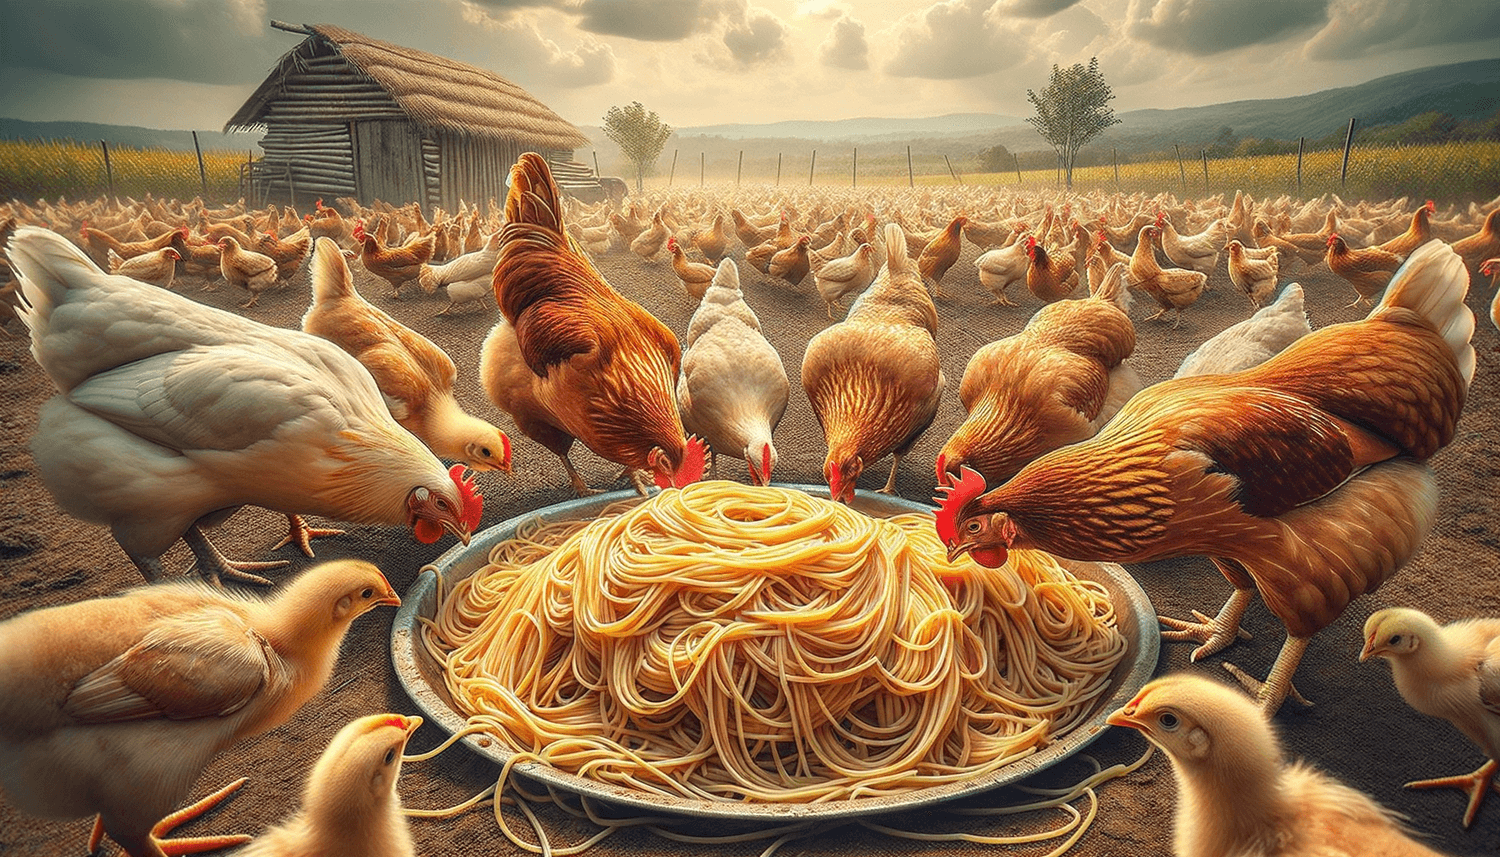 Can Chickens Eat Spaghetti Noodles?